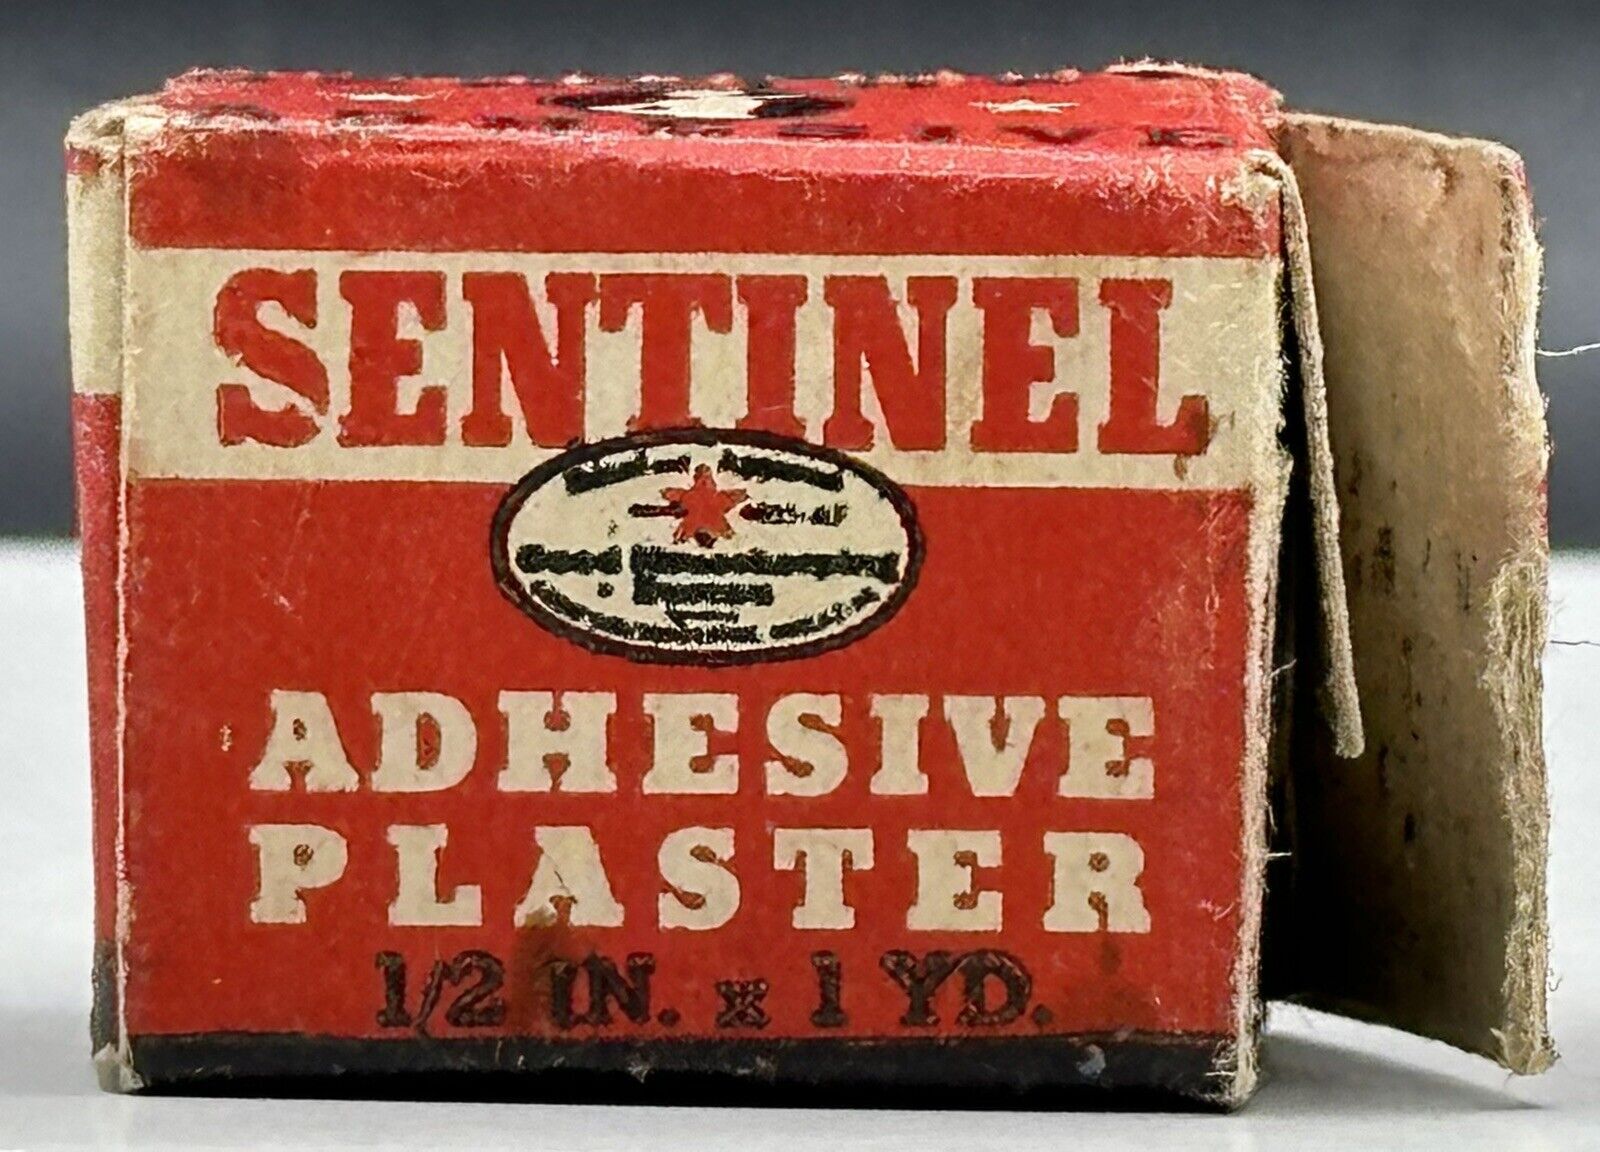 VTG Sentinel Adhesive Plaster W/ Box No A1 Good Housekeeping Approved USA